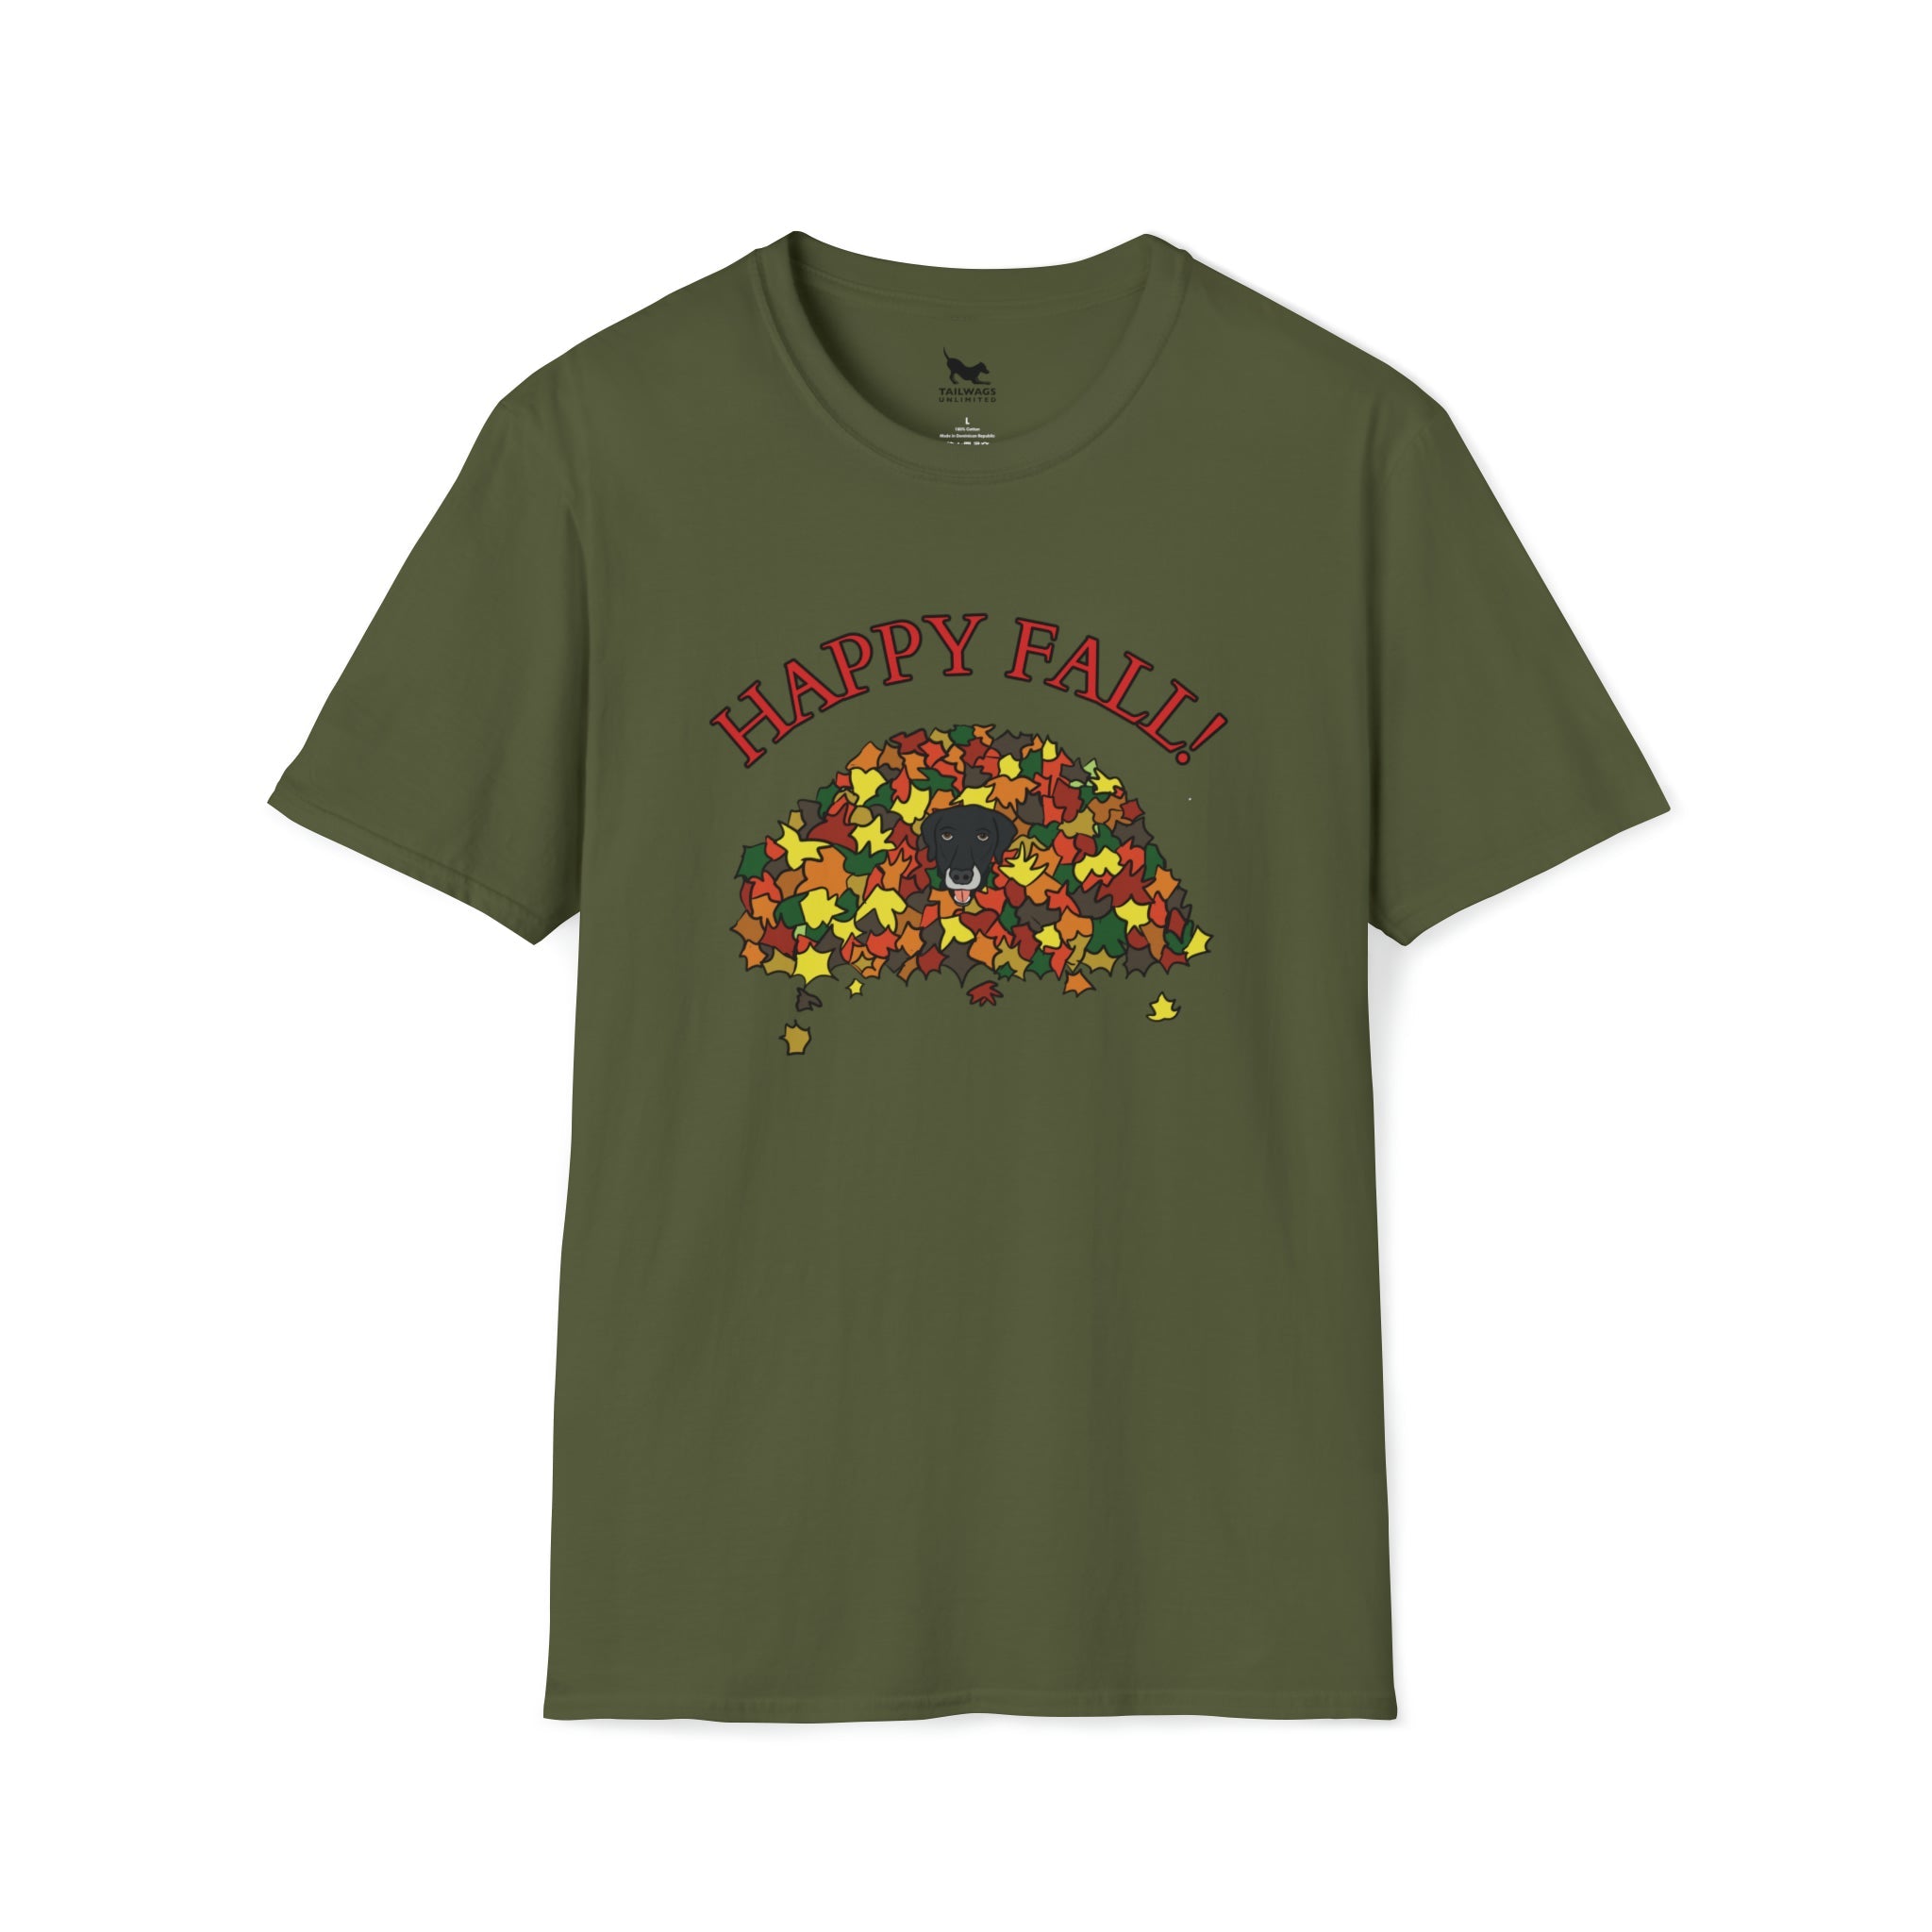 Hiding in the Leaf Pile T-Shirt - TAILWAGS UNLIMITED